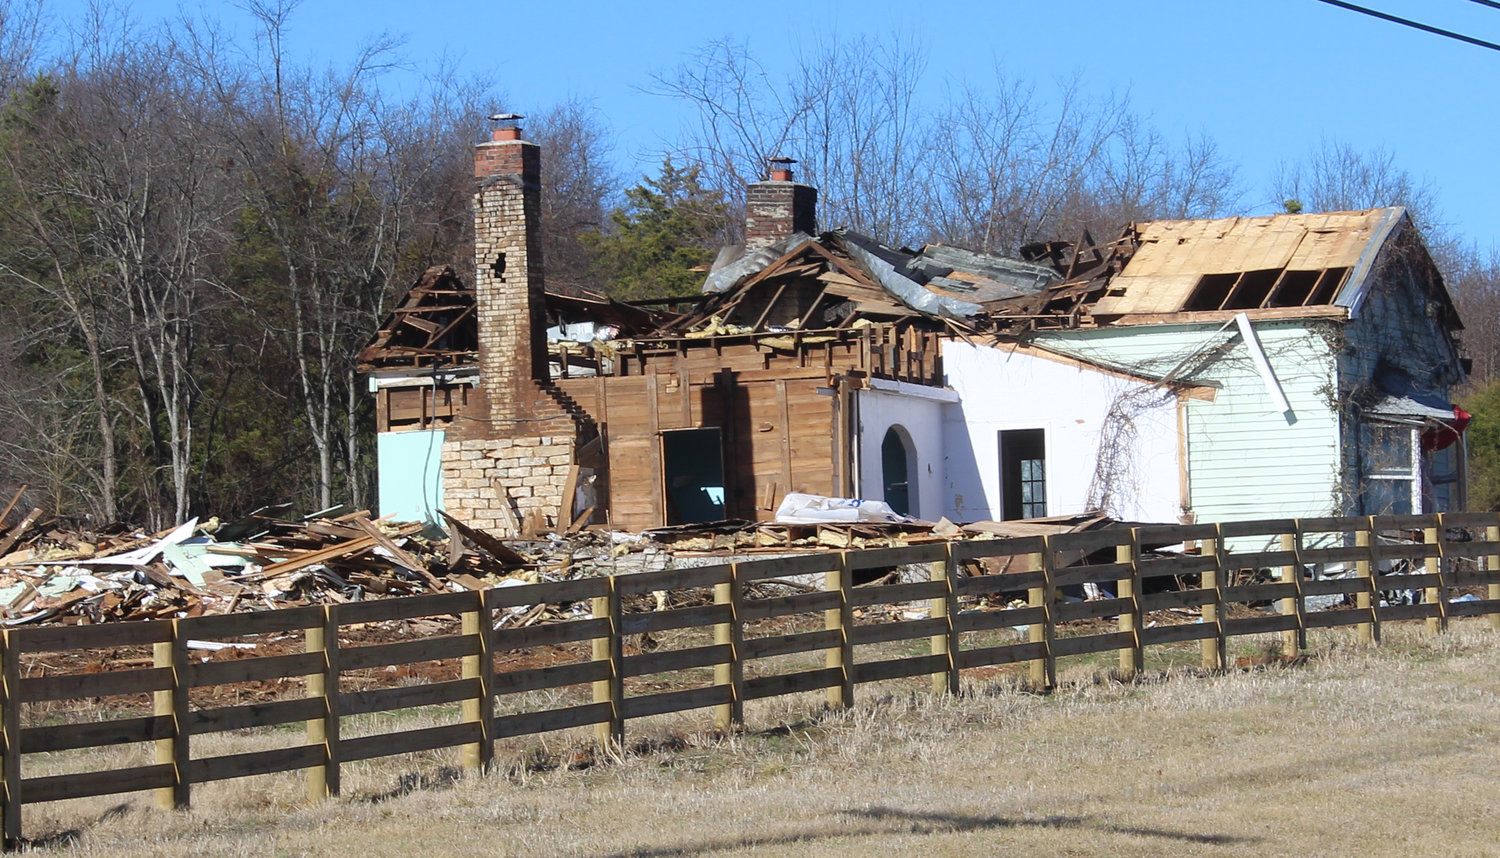 The area around U.S. 231 north of Shelbyville also continues to evolve. Among the changes is the removal of this older home, once stately but recently in a state of disrepair, just north of Deason.